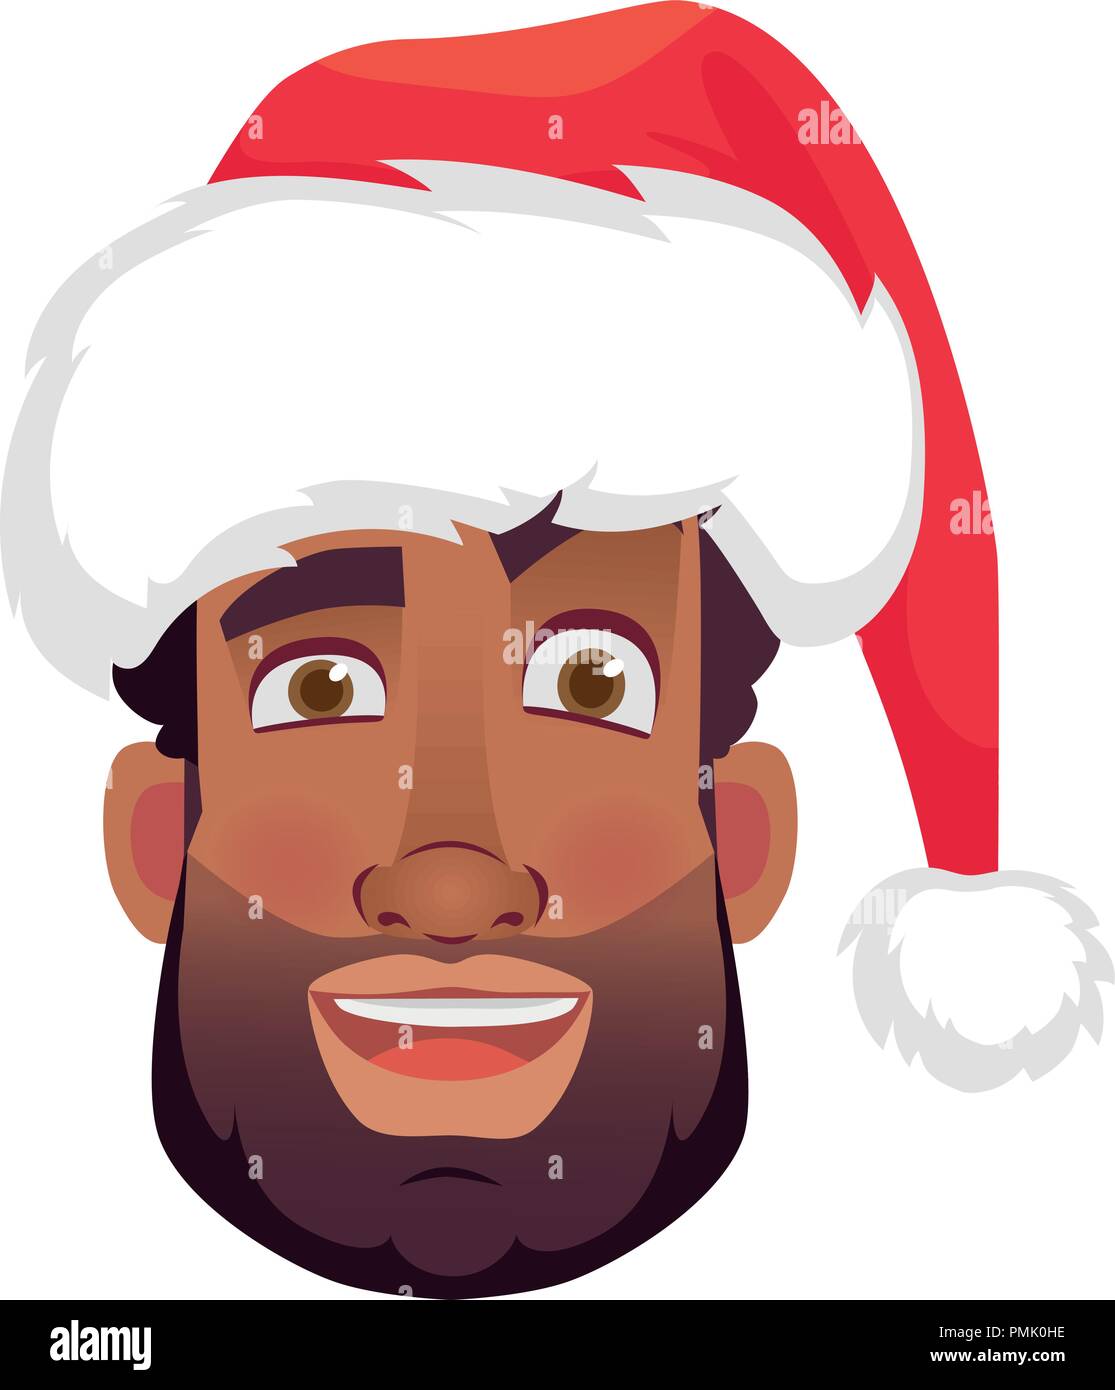 Head of African man in a Santa Claus hat. African american man face expression. Human emotions icon. Set of cartoon vector illustrations. Stock Vector